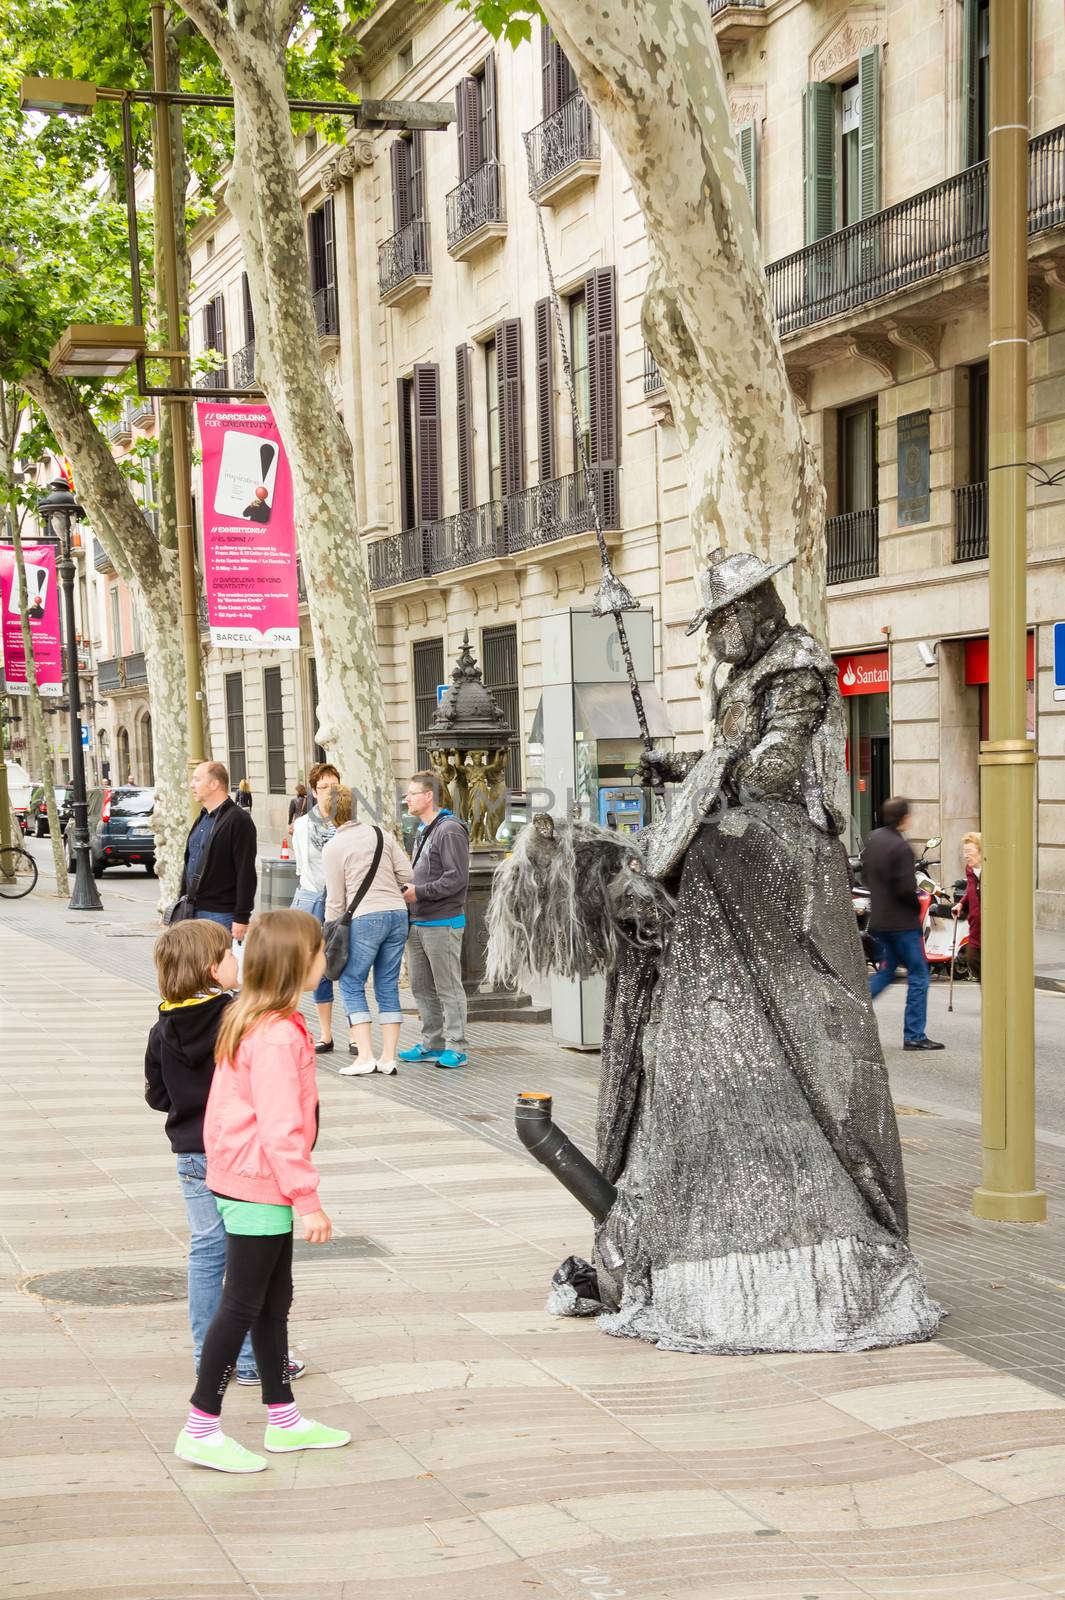 BARCELONA, SPAIN - MAY 31 Childs looking a street artist in the famous and touristic La Rambla street, in Barcelona, Spain, on May 31, 2013